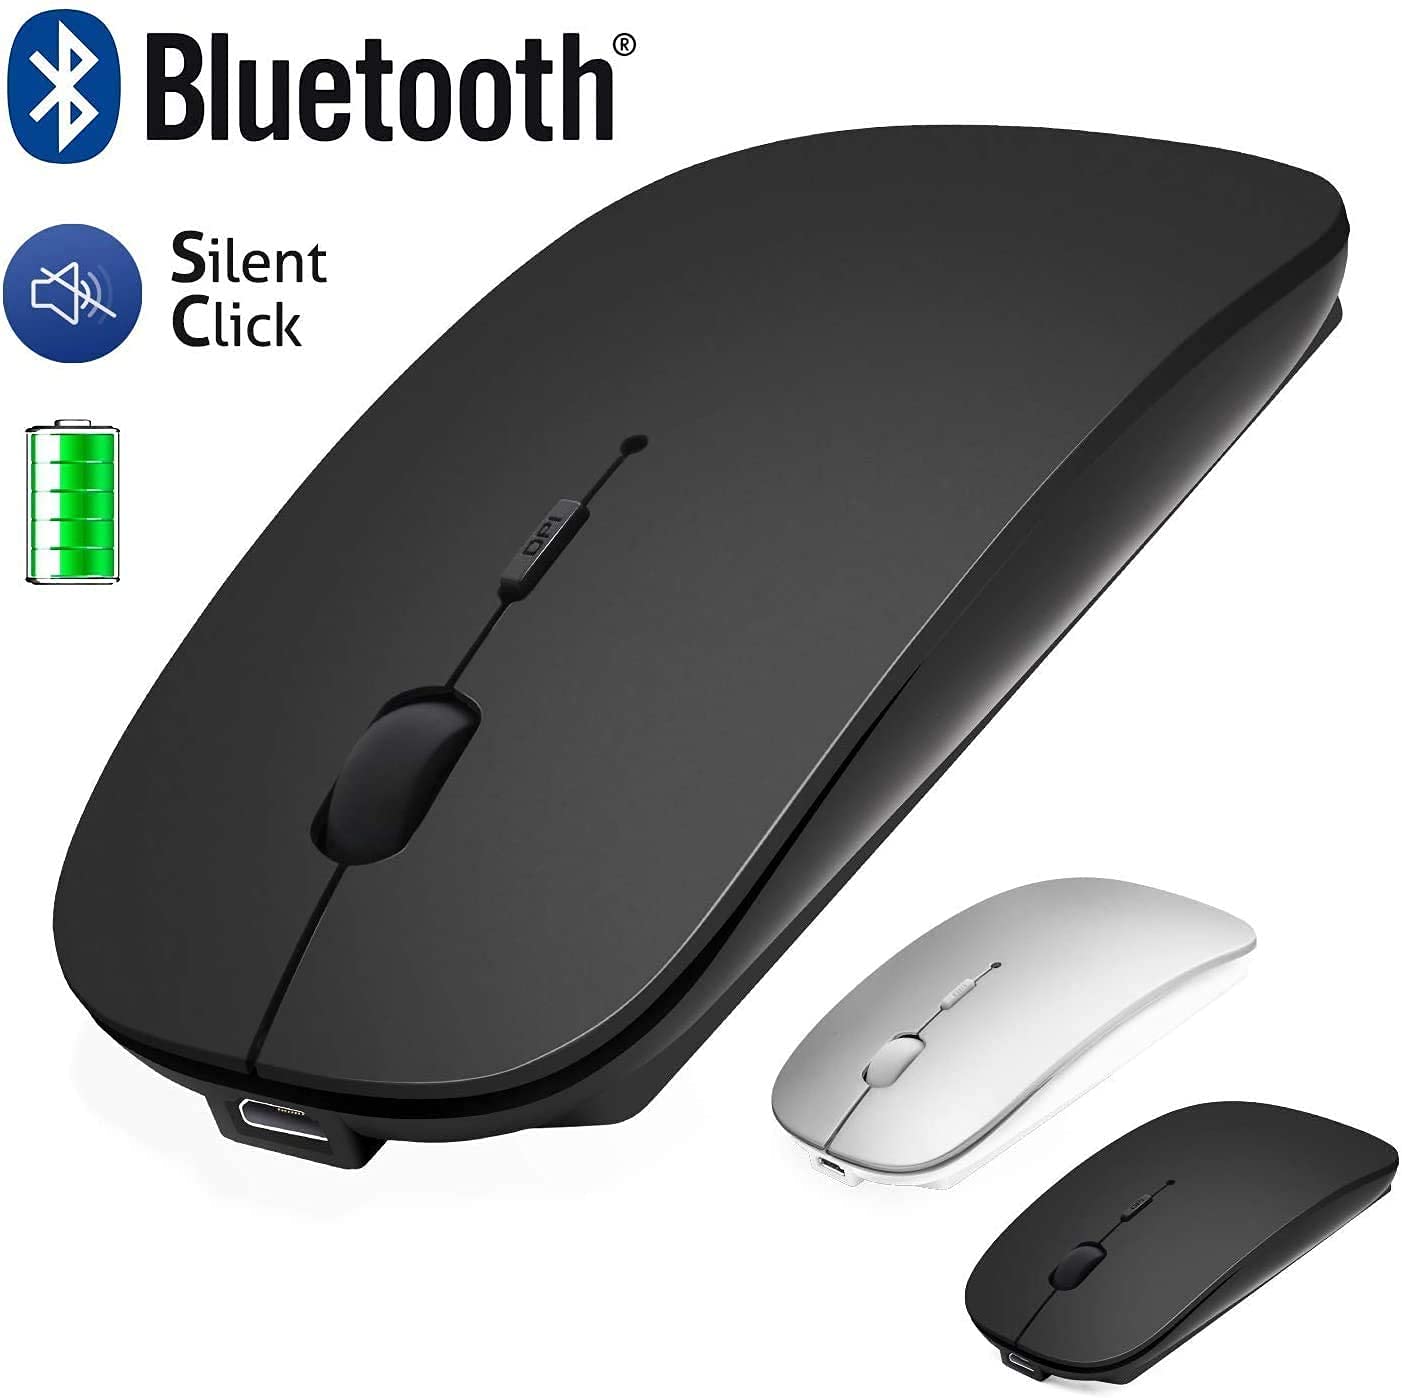 Wireless Bluetooth Mouse for Laptop / Macbook / iPad / iPhone (iOS13.1.2 and Later), Rechargeable Noiseless Mini Mouse Compatible with Android/ Windows/Linux Black